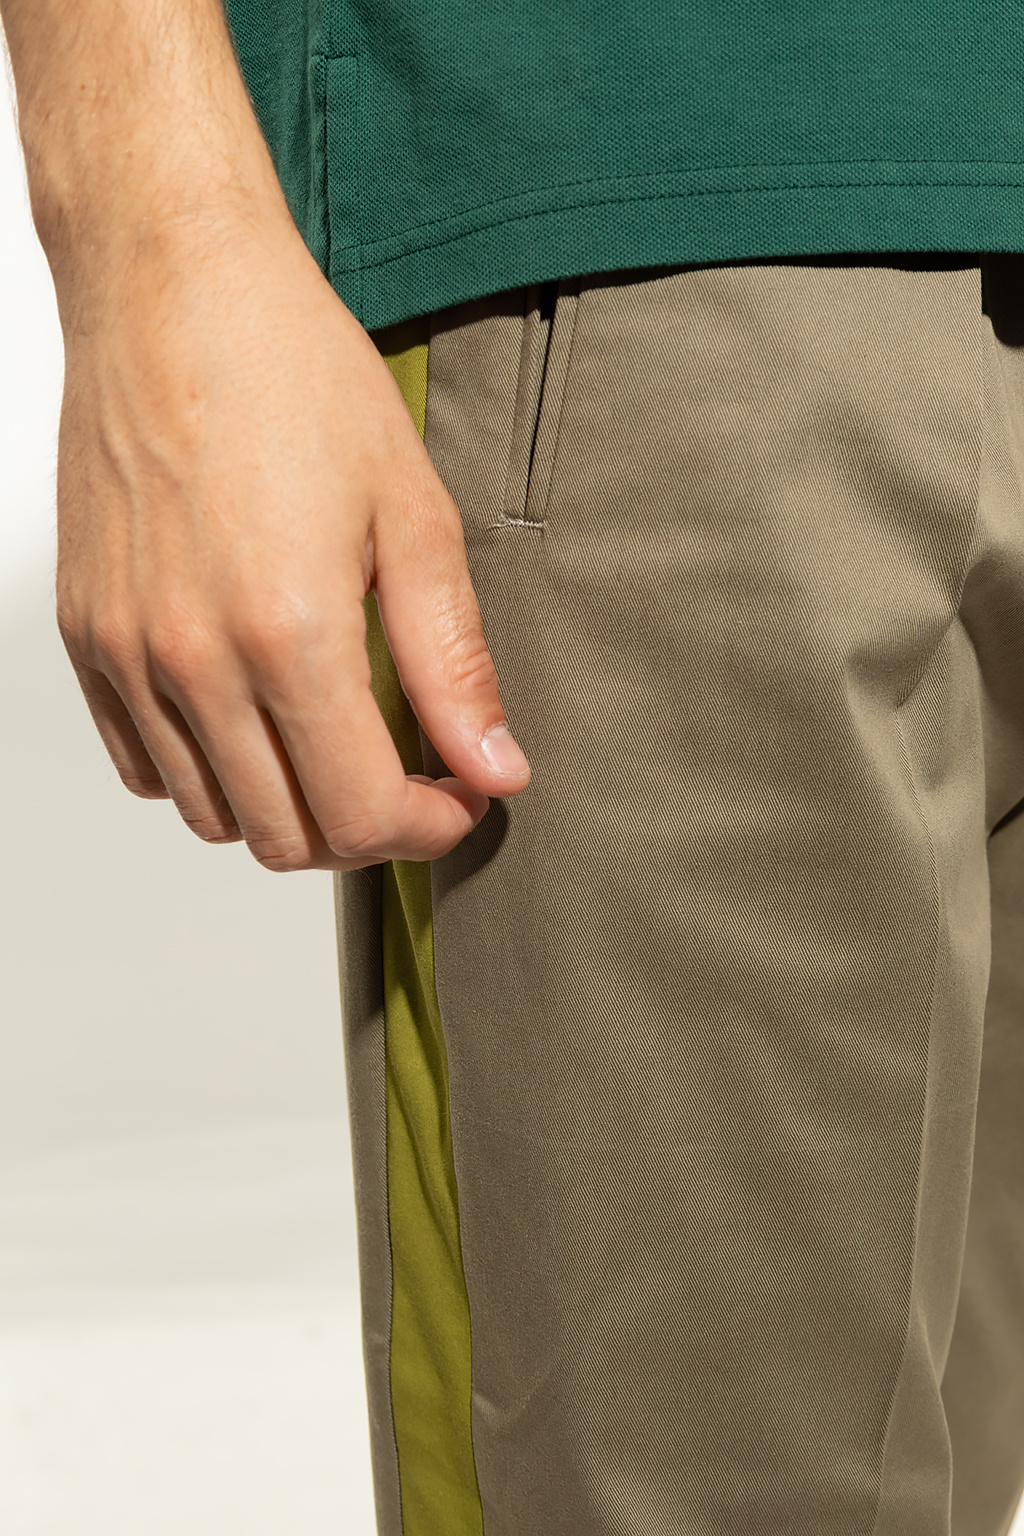 Etro Pleat-front trousers with side stripes